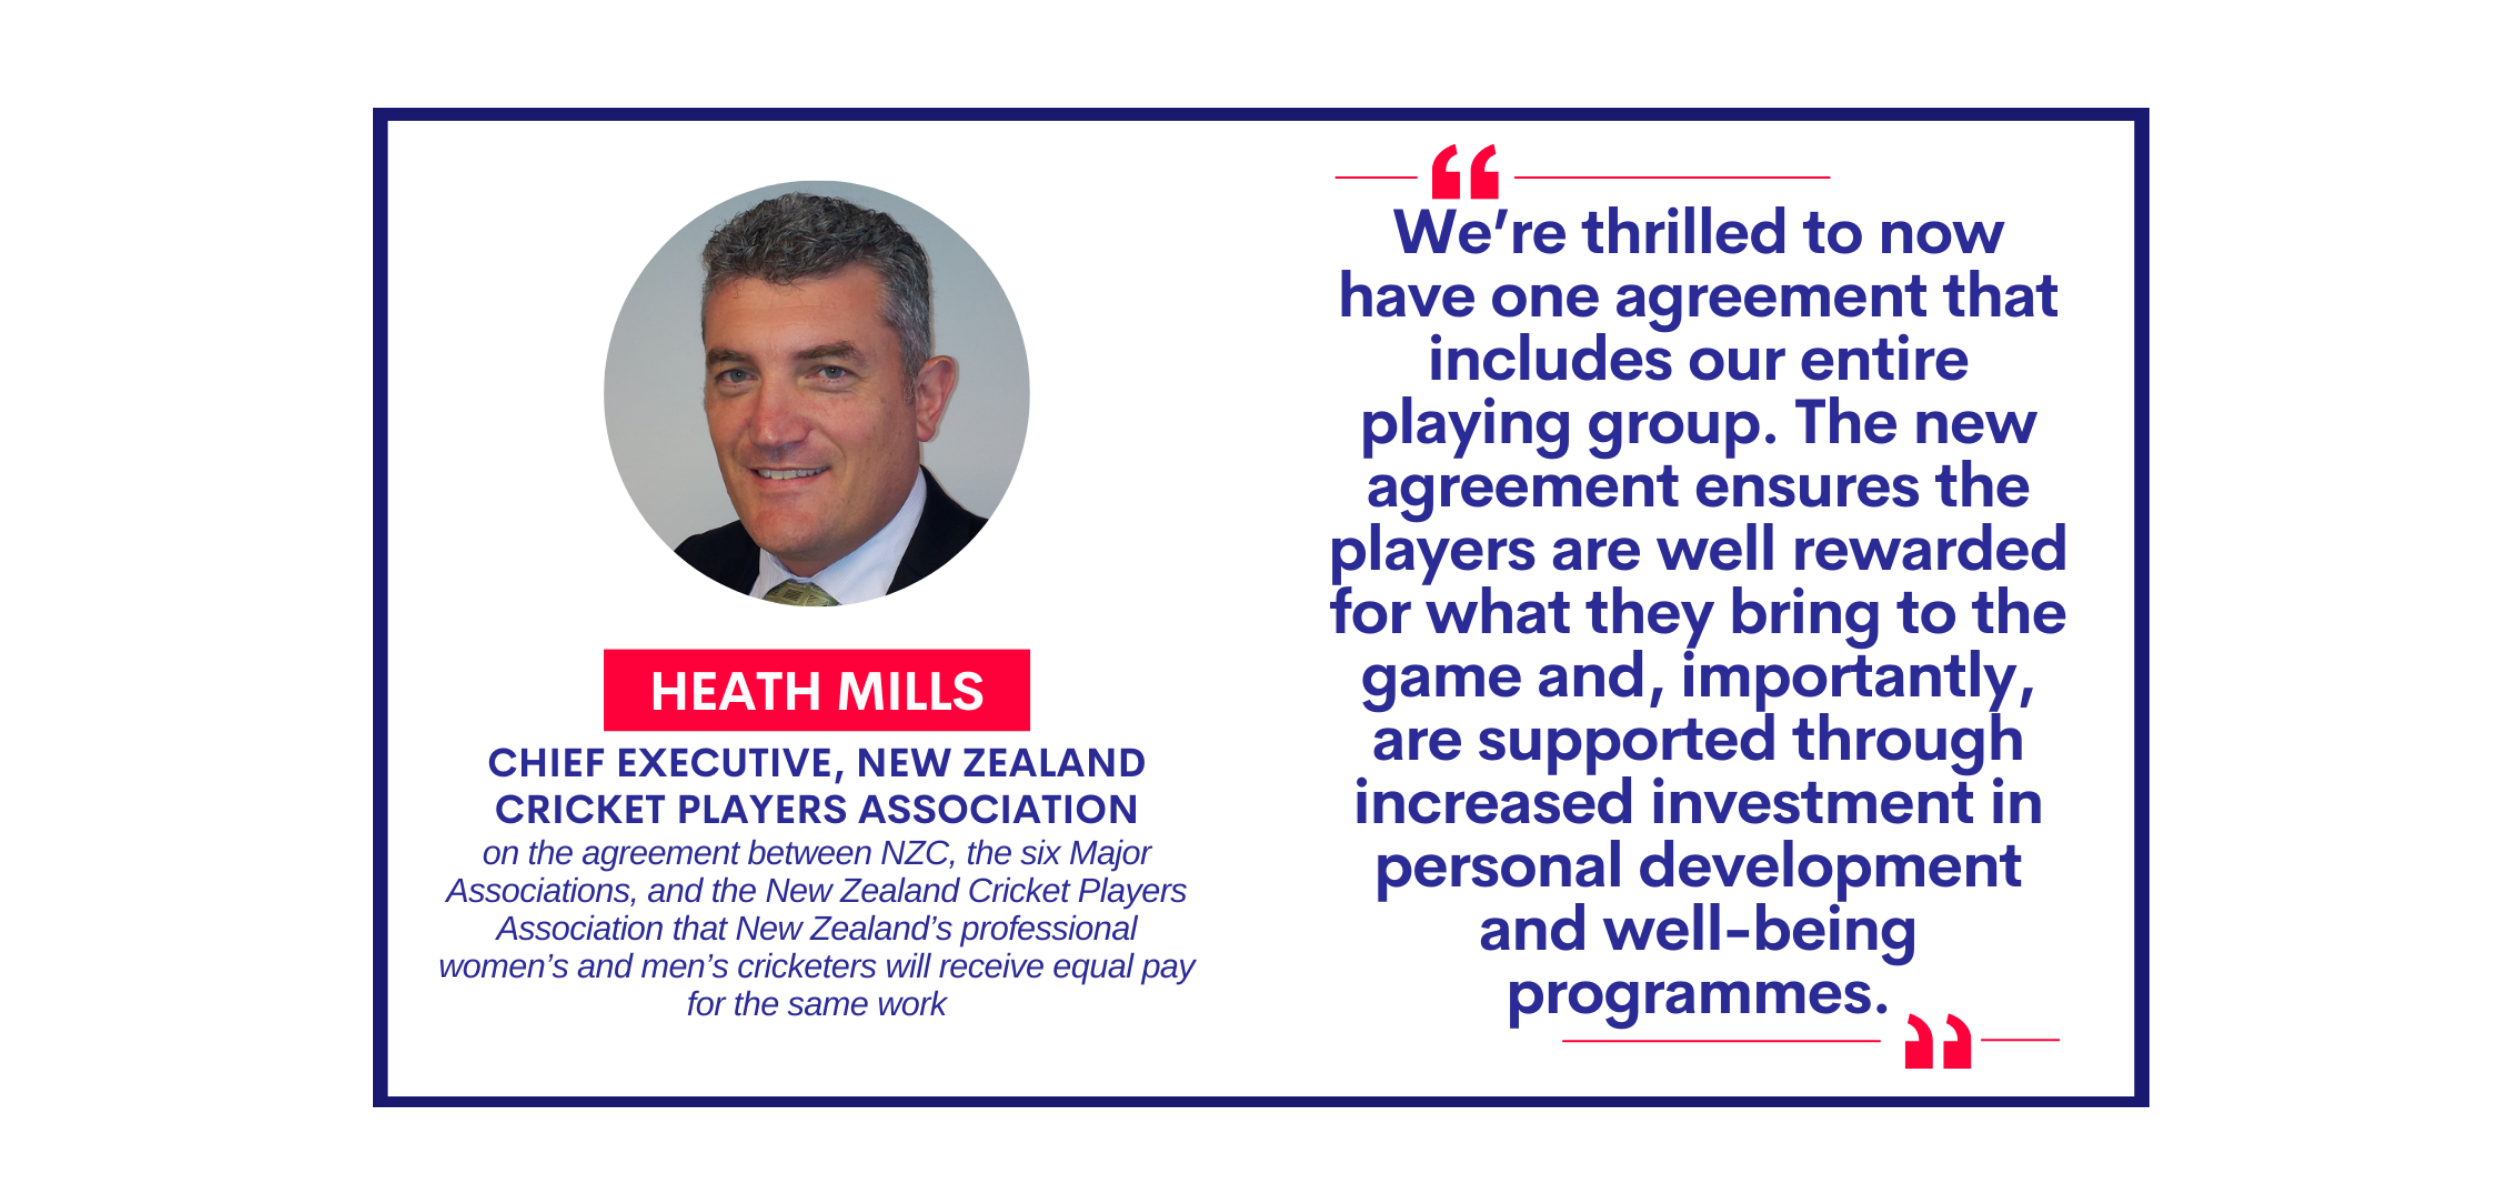 Heath Mills, Chief Executive, New Zealand Cricket Players Association on the agreement between NZC, the six Major Associations, and the New Zealand Cricket Players Association that New Zealand’s professional women’s and men’s cricketers will receive equal pay for the same work